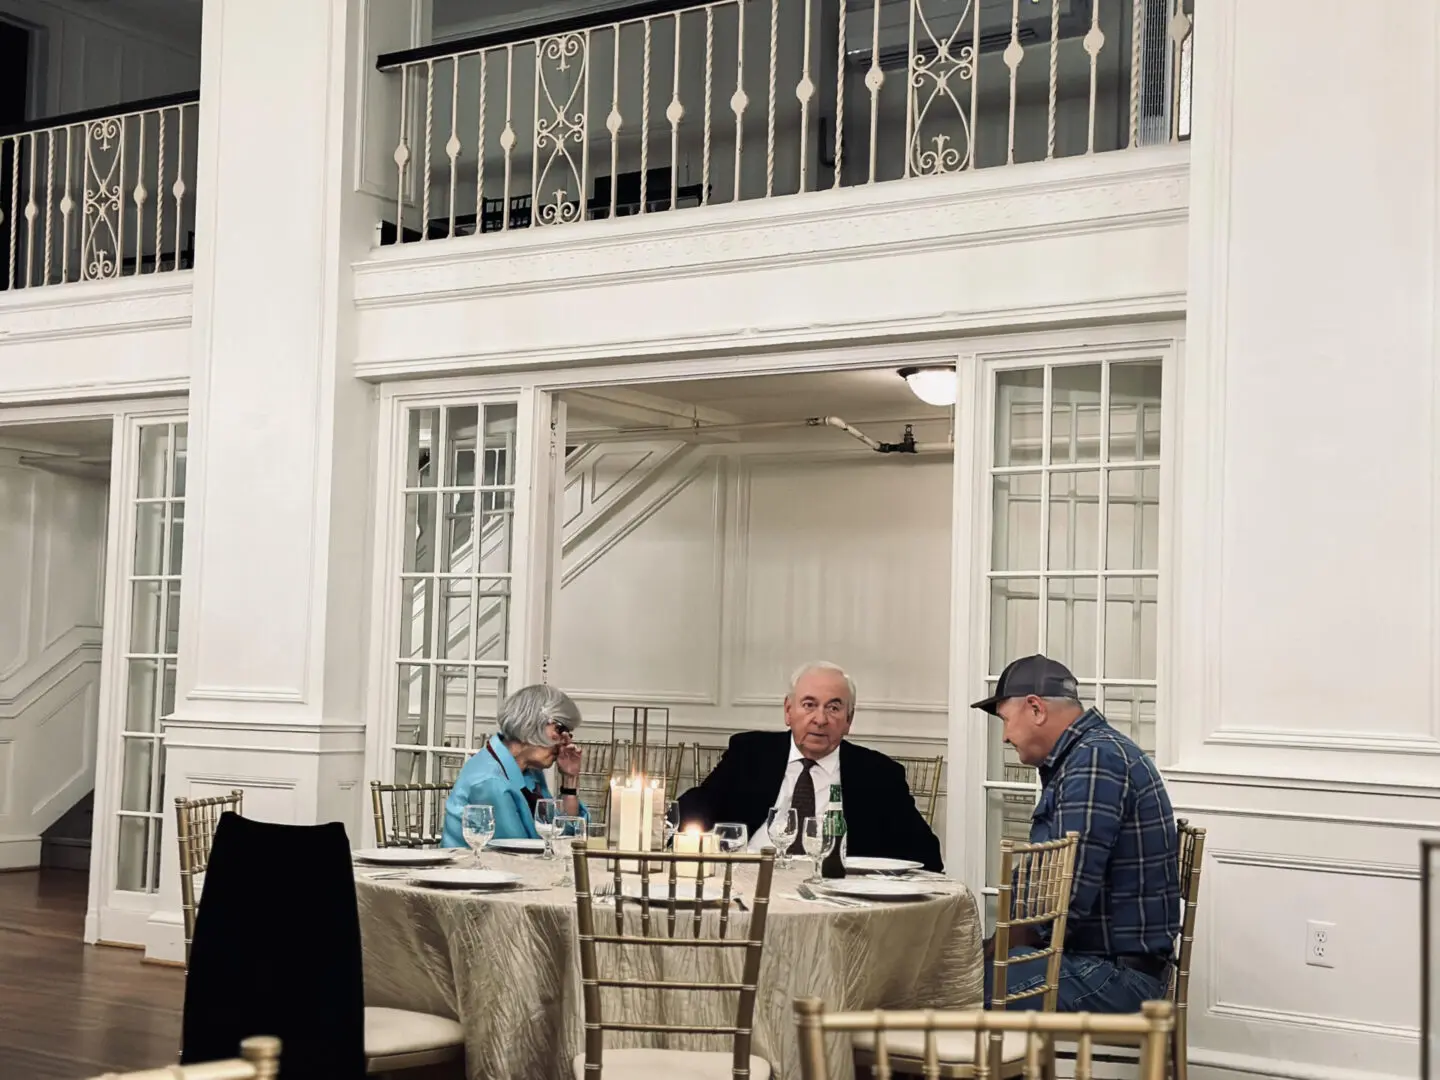 Three people sitting at a table in front of two windows.